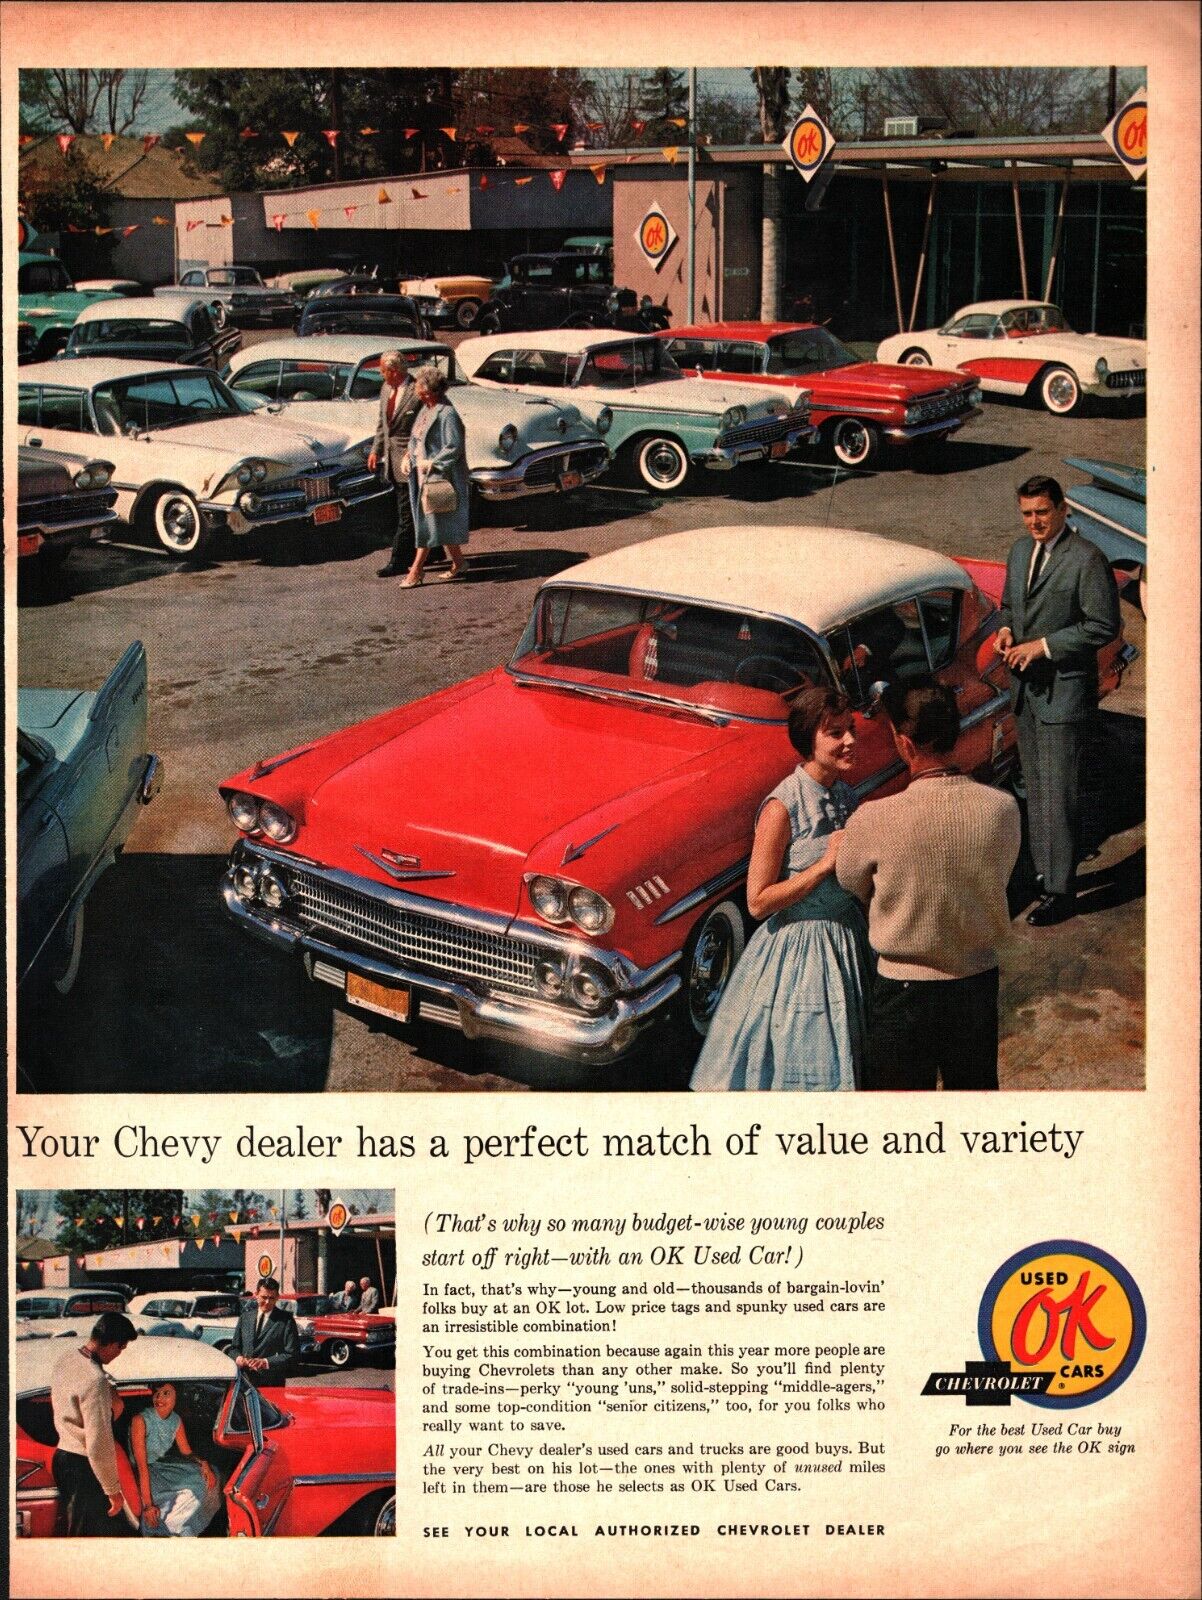 1961 1964 CHEVROLET OK USED CARS FOR THE BEST USED CAR BUY AD PRINT c3